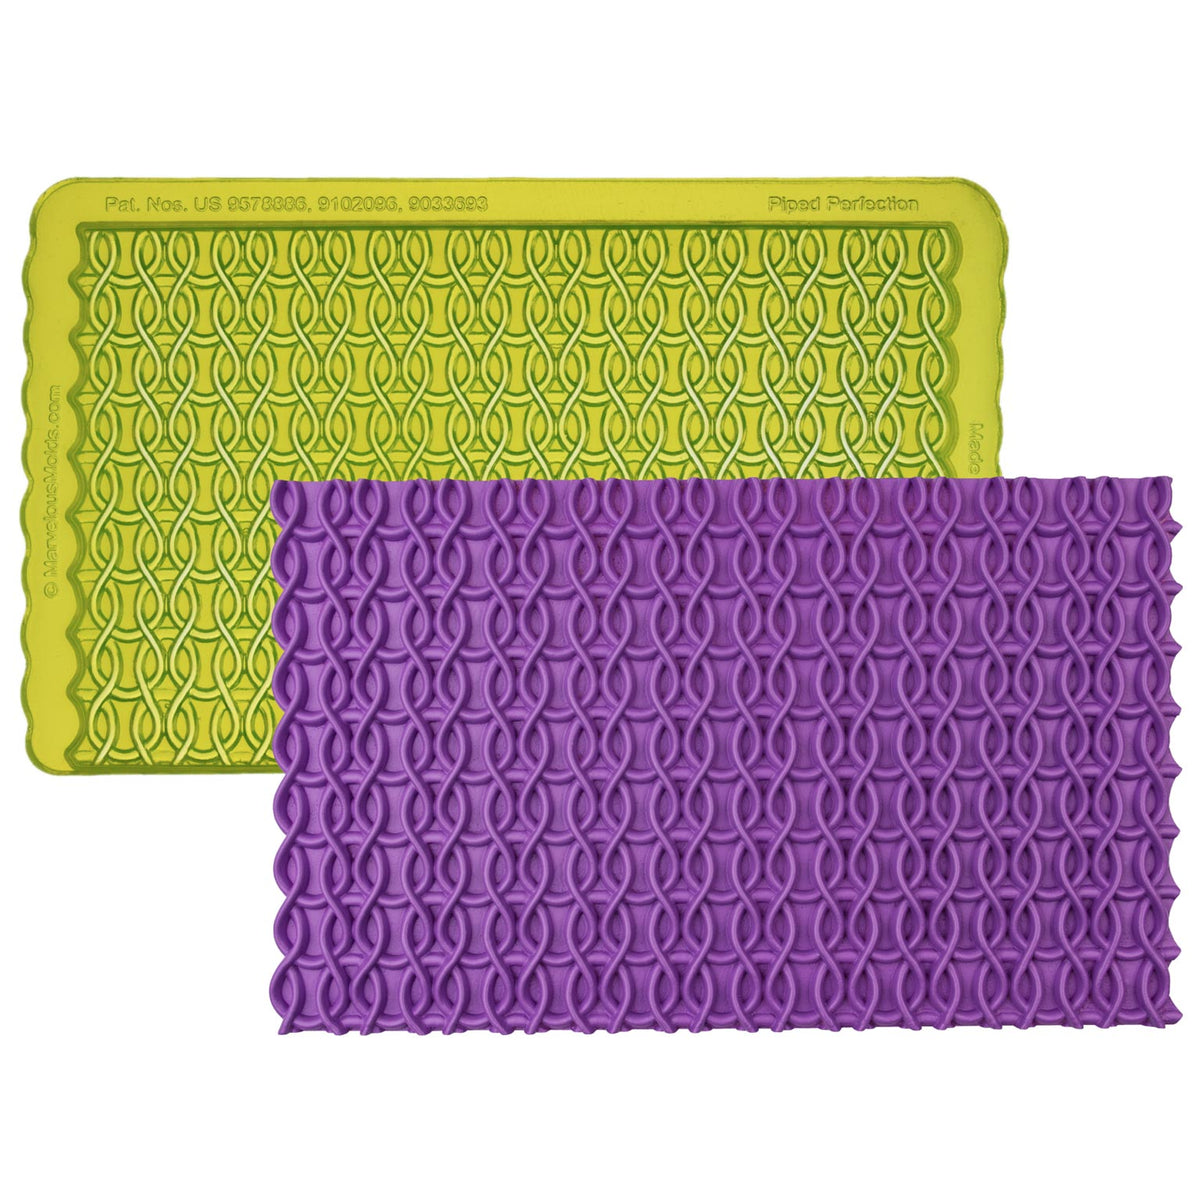 Piped Perfection Silicone Simpress, Texture Mat, Sprig Mold for Pottery by Marvelous Molds